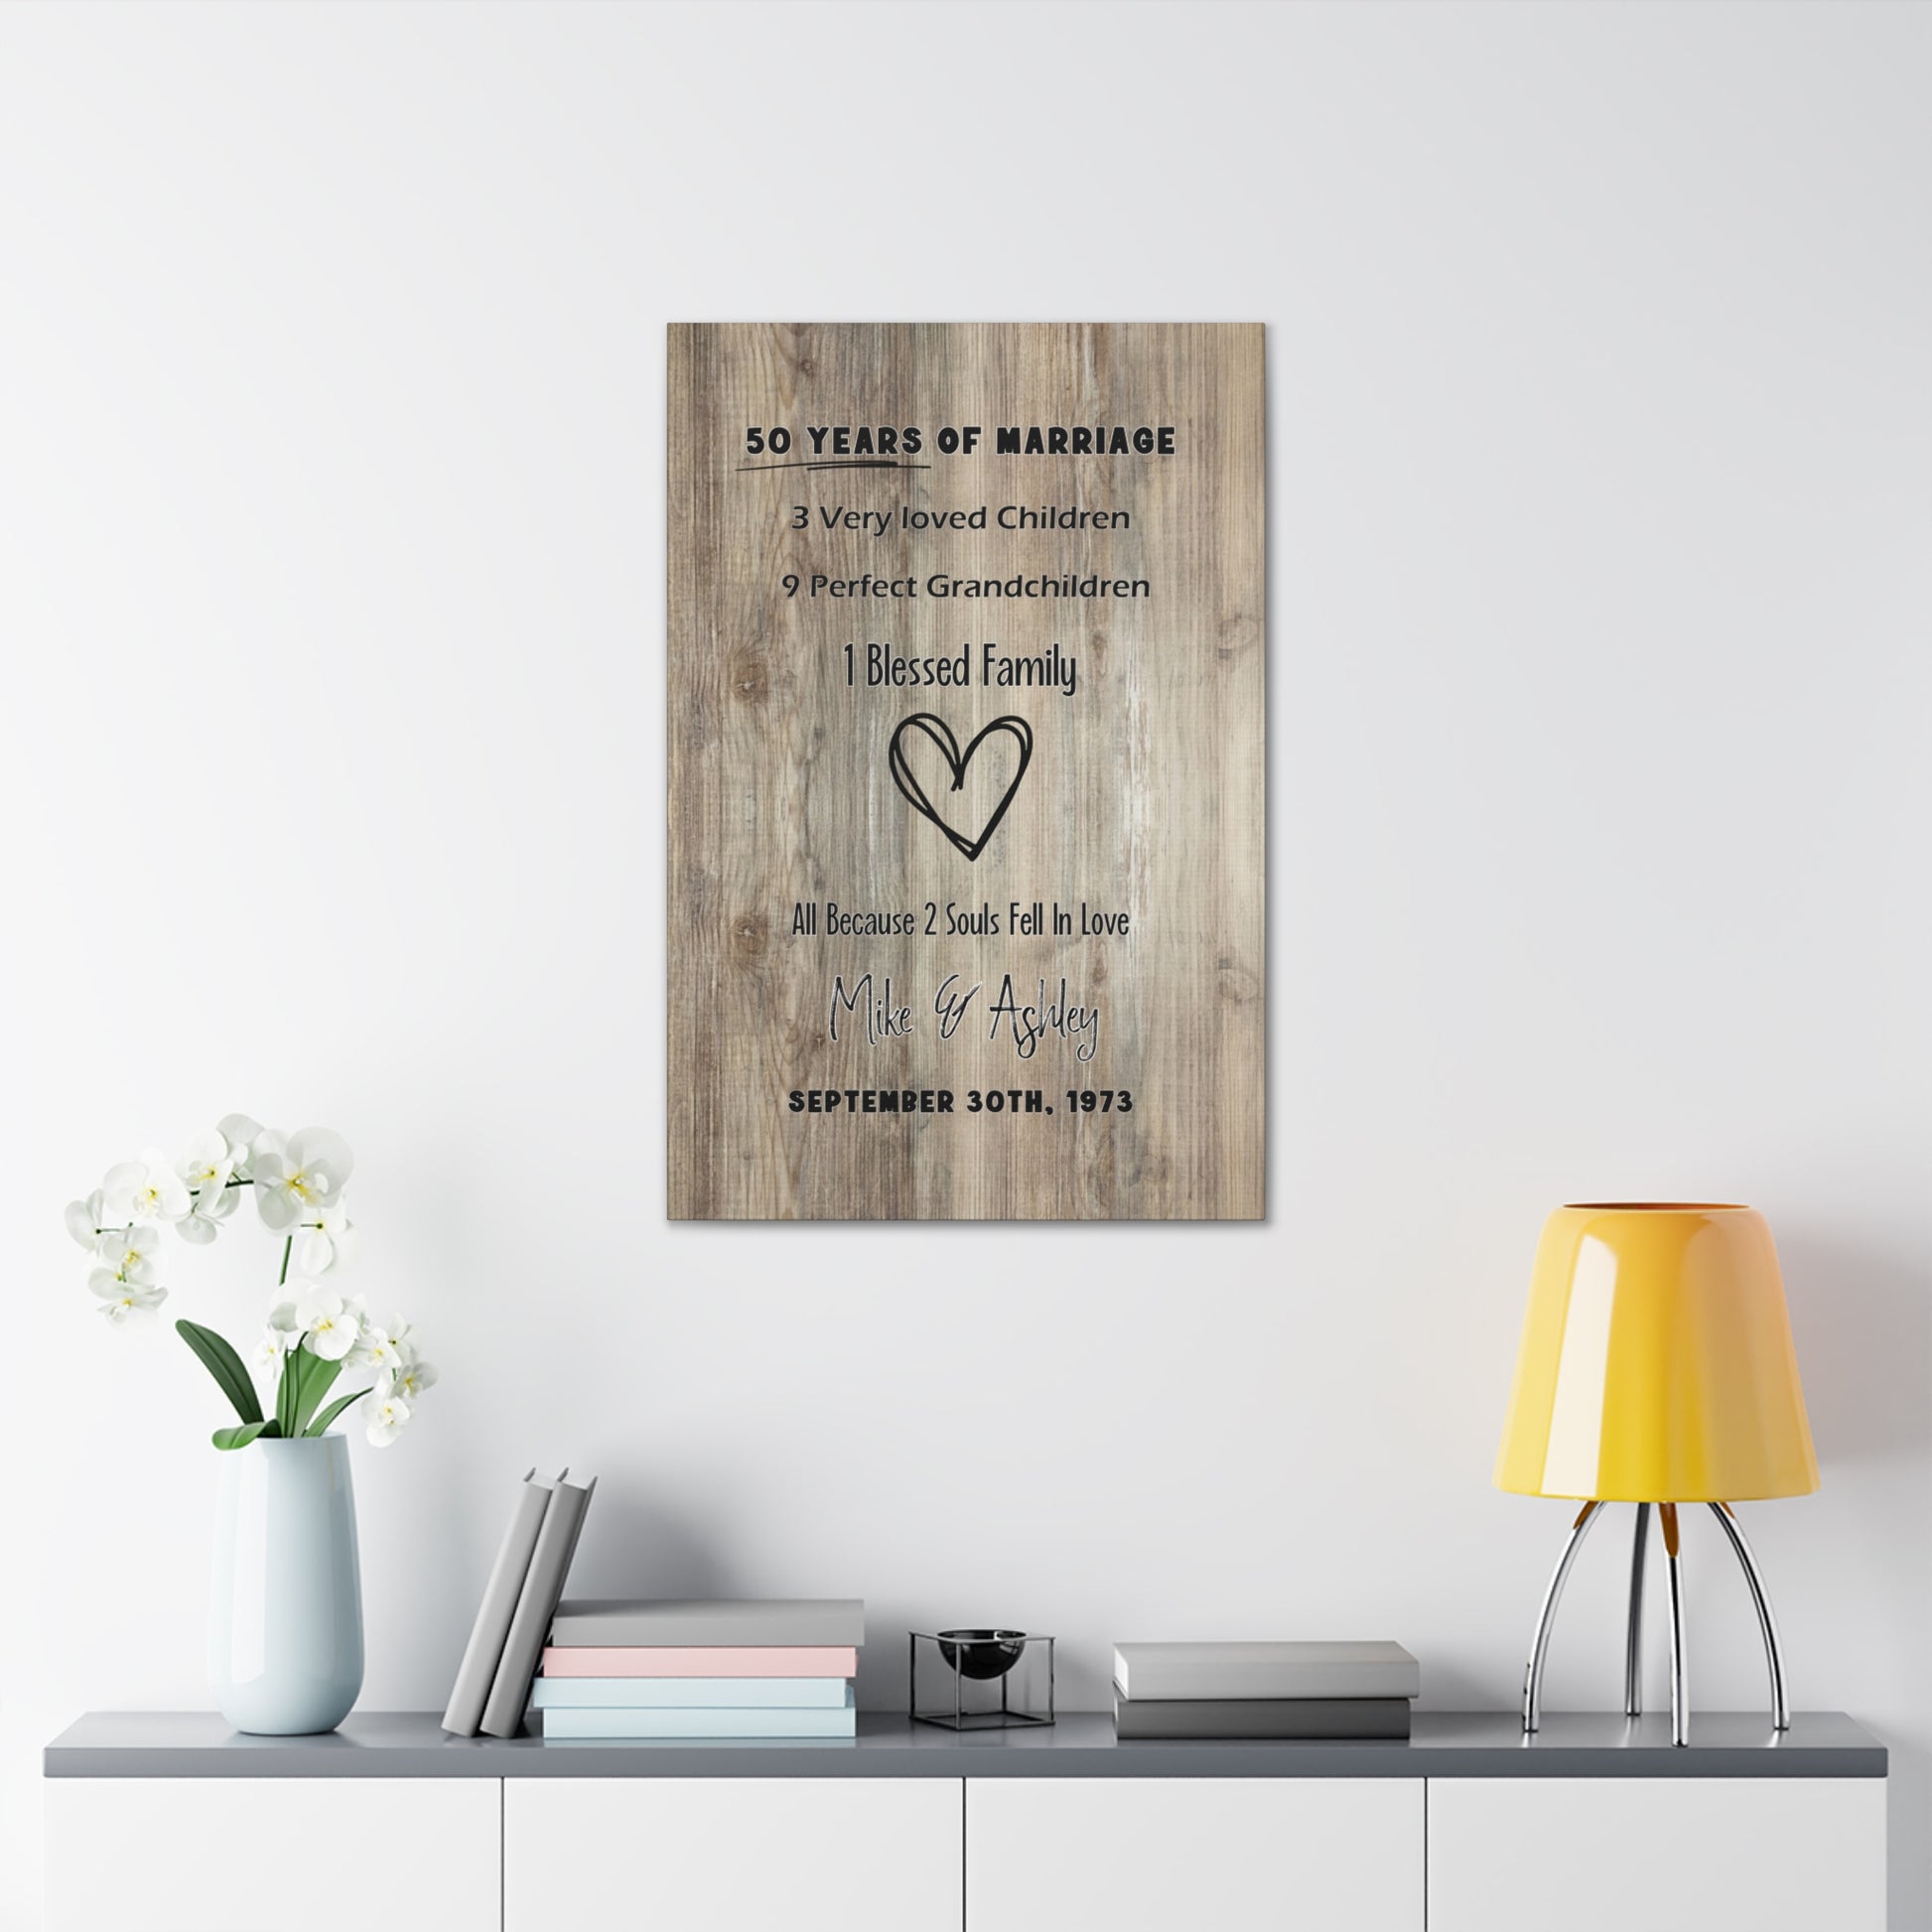 "50 Years Of Marriage" Wall Art - Weave Got Gifts - Unique Gifts You Won’t Find Anywhere Else!